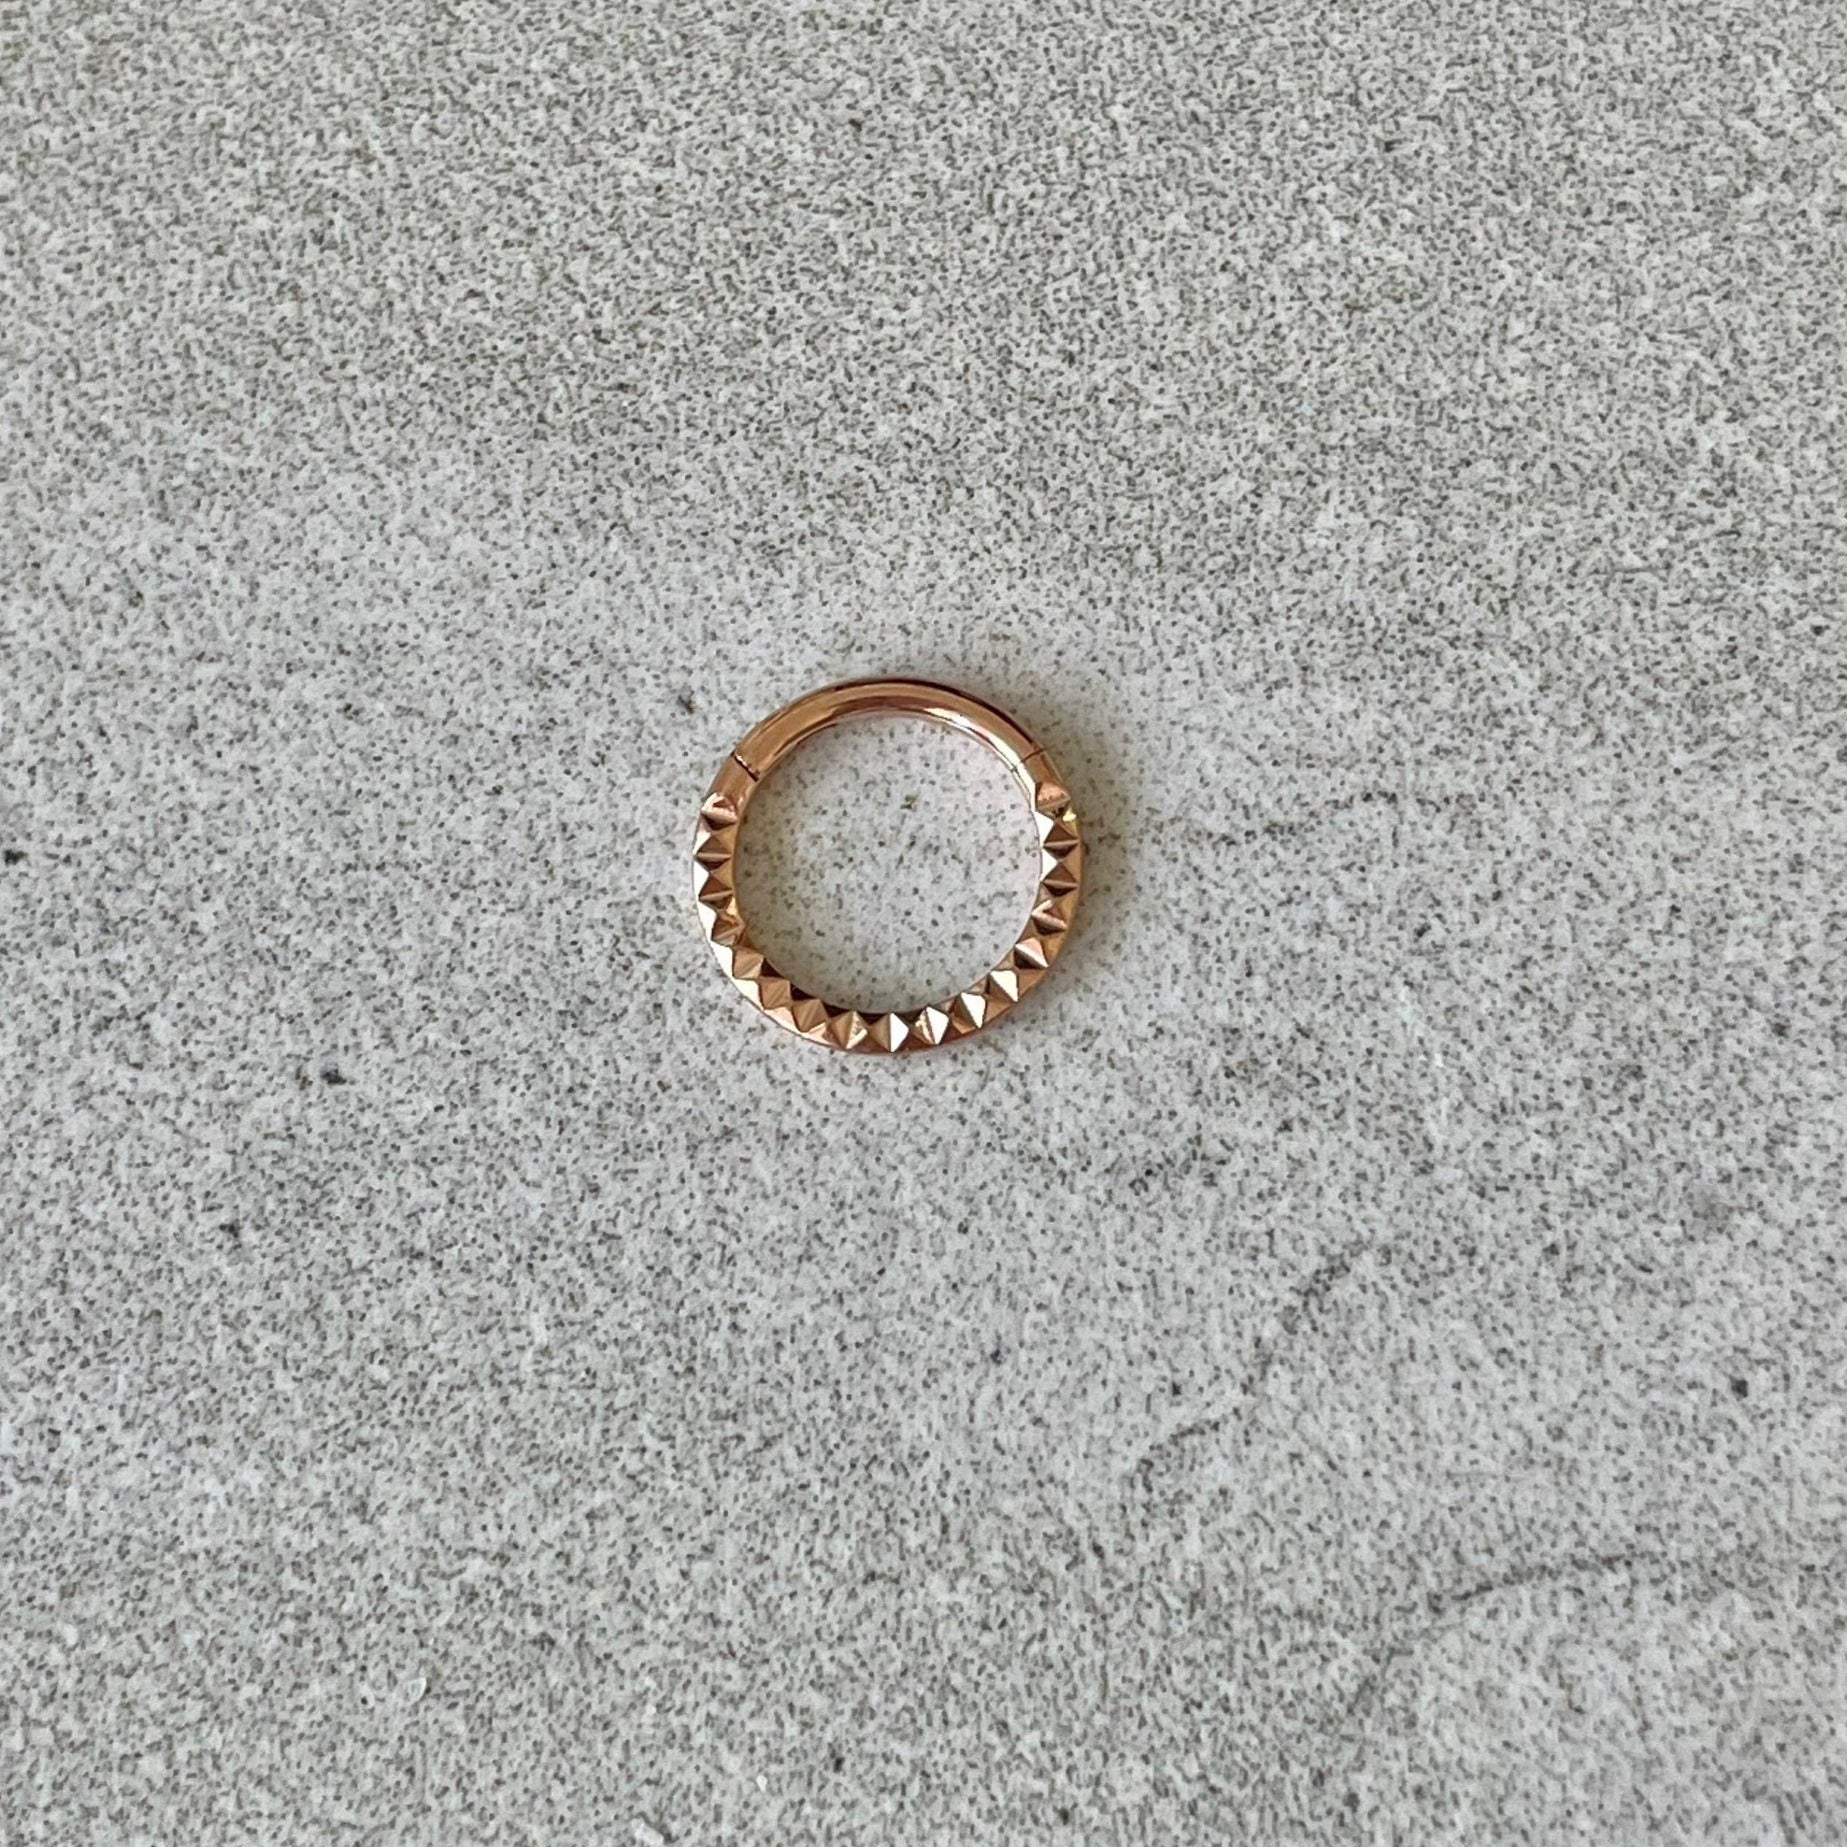 Rose Gold Hammered Daith Earring (16G | 8mm | Titanium | Gold, Silver or Rose Gold)